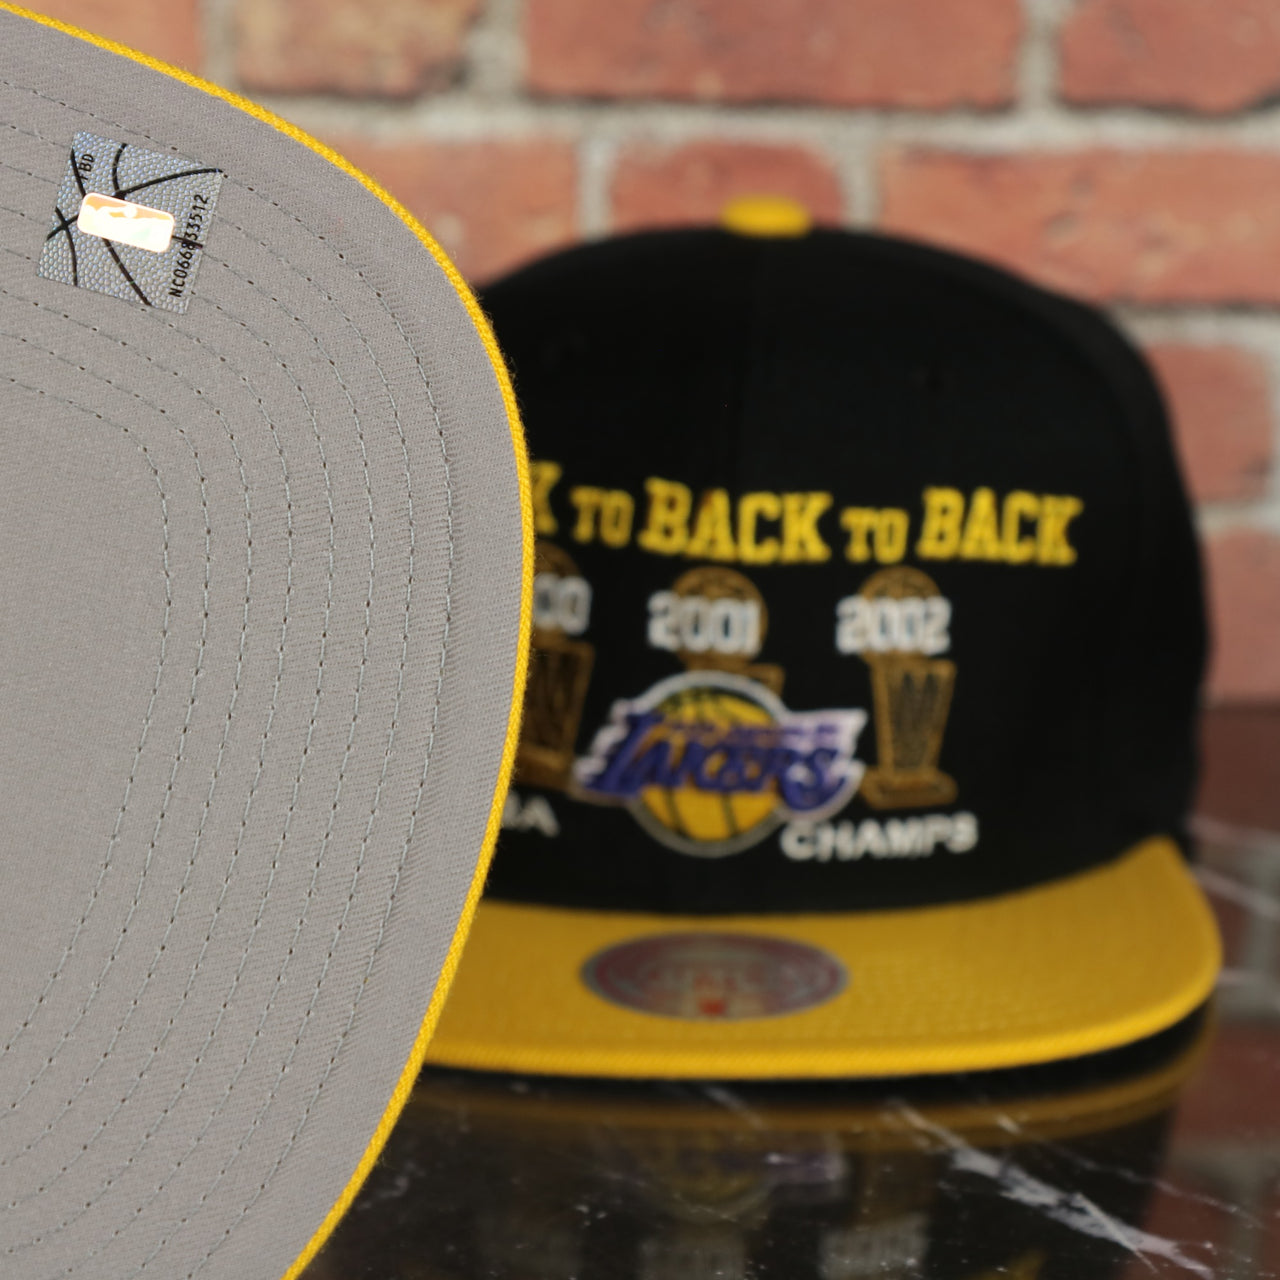 grey under visor on the Los Angeles Lakers Vintage Retro NBA Champions 00-02 Back to Back to Back Mitchell and Ness Snapback Hat | Black